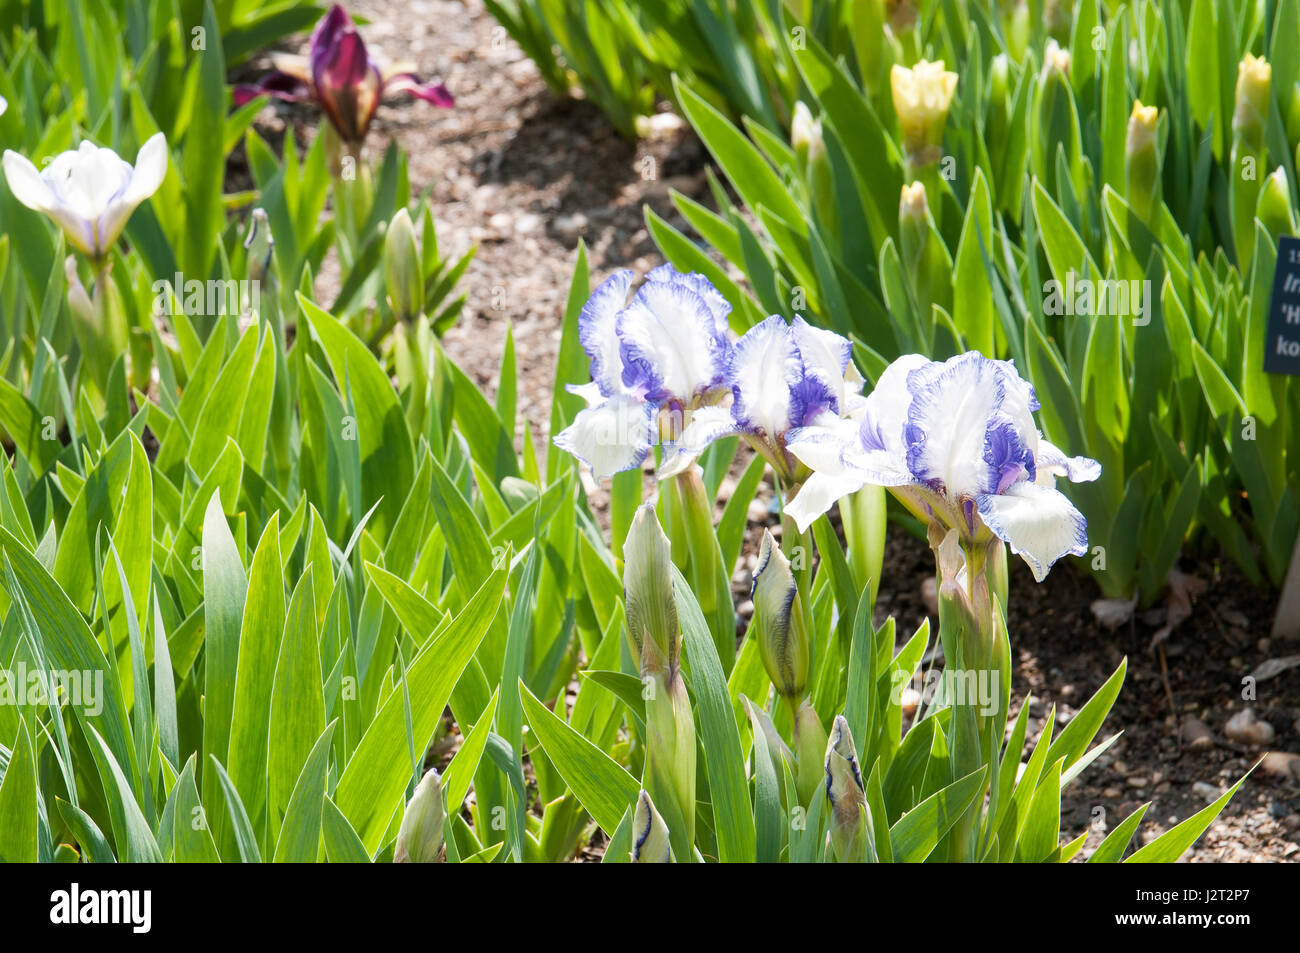 Iris is a genus of monocotyledonous plants of the Iridaceae family. The Latin name of the genus comes from the Greek goddess Stock Photo